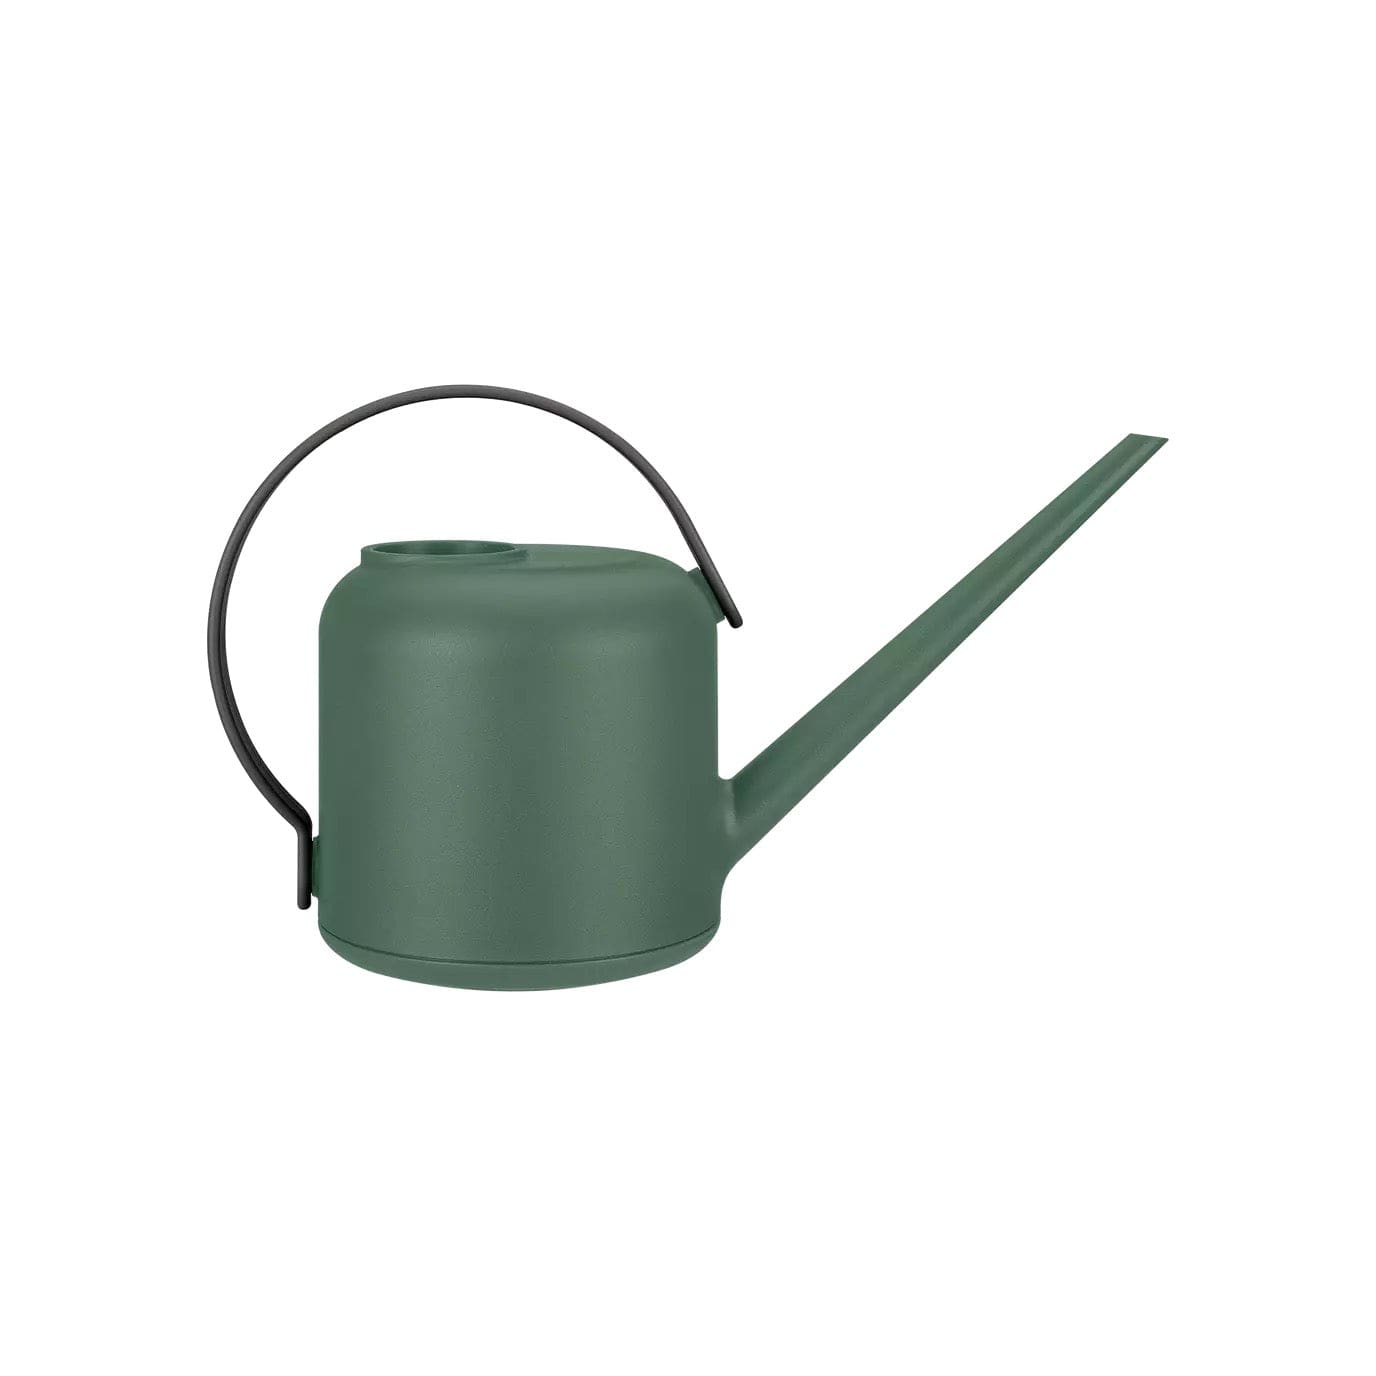 Elho Watering Can Watering Can - Recycled Plastic ' b.for soft' - Leaf Green